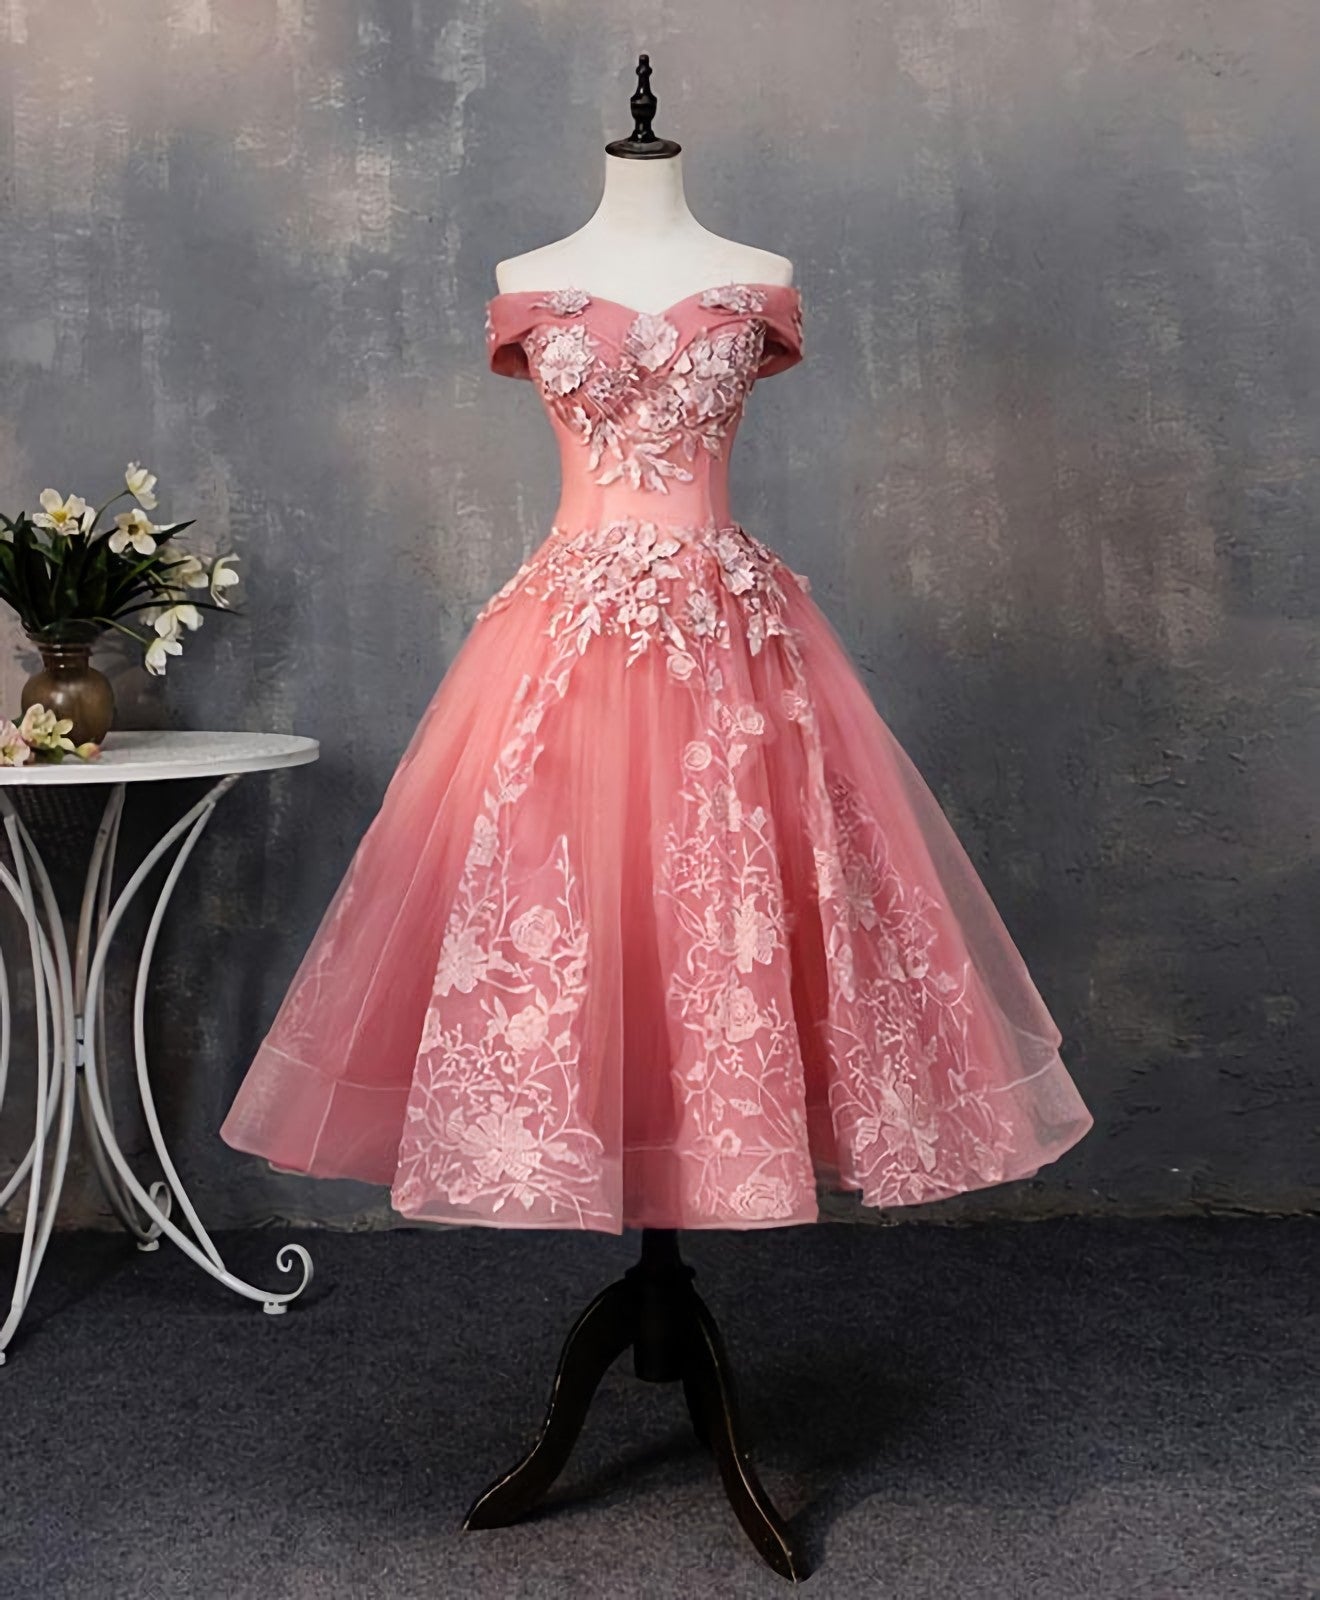 Homecoming Dress Inspo, Pink Tulle Lace Off Shoulder Short Prom Dress, Pink Homecoming Dress